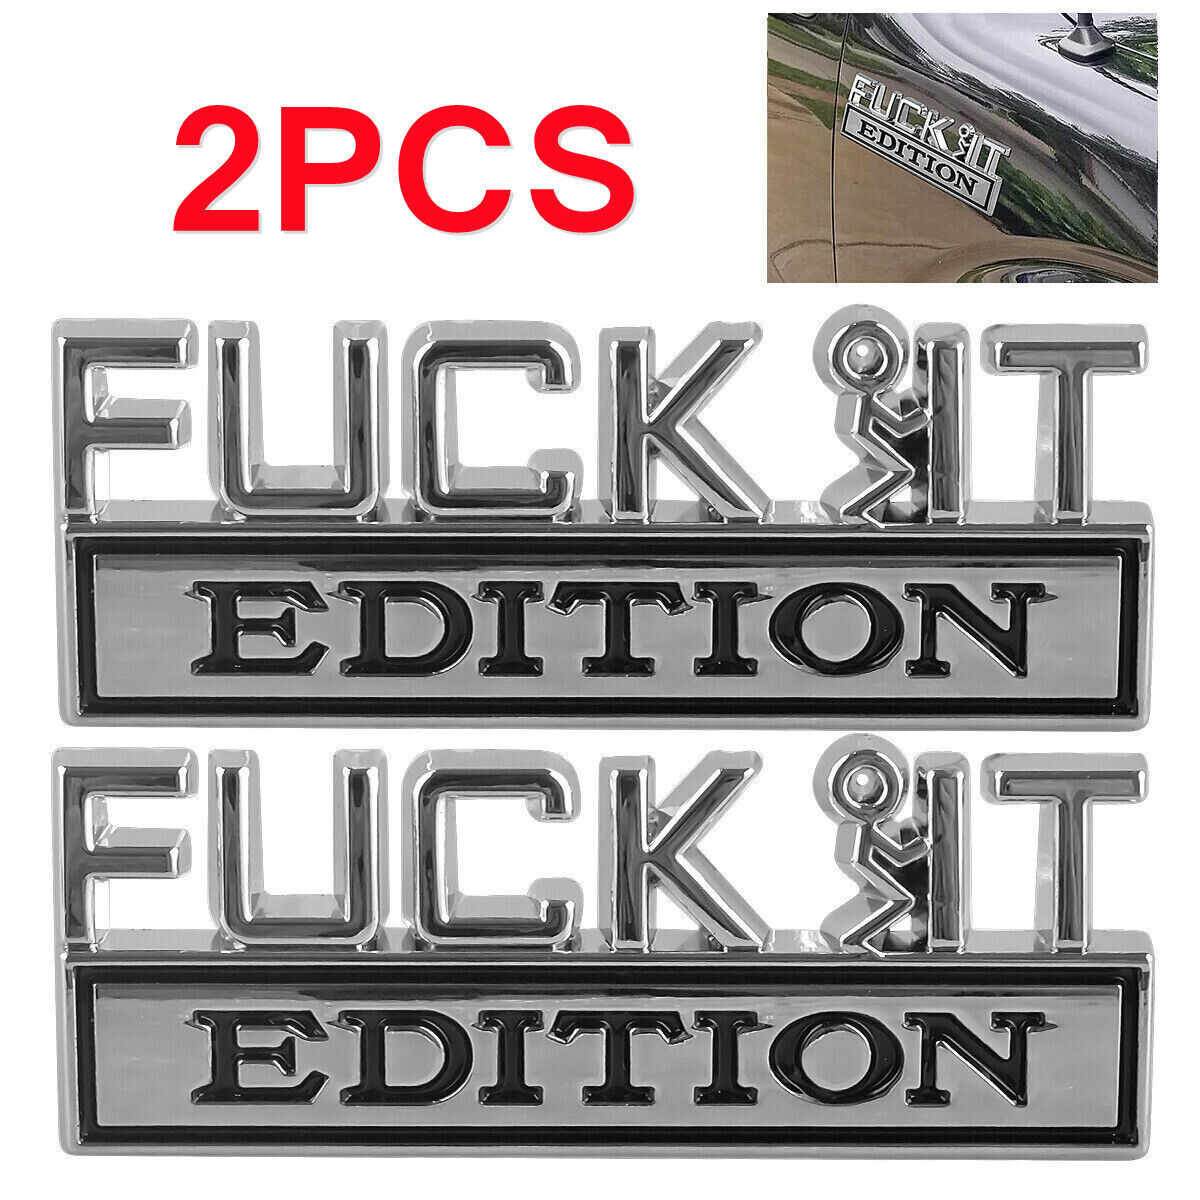 2X F*CK-IT EDITION Emblem Badge Decal Sticker Sliver for Chevy Truck Fit All